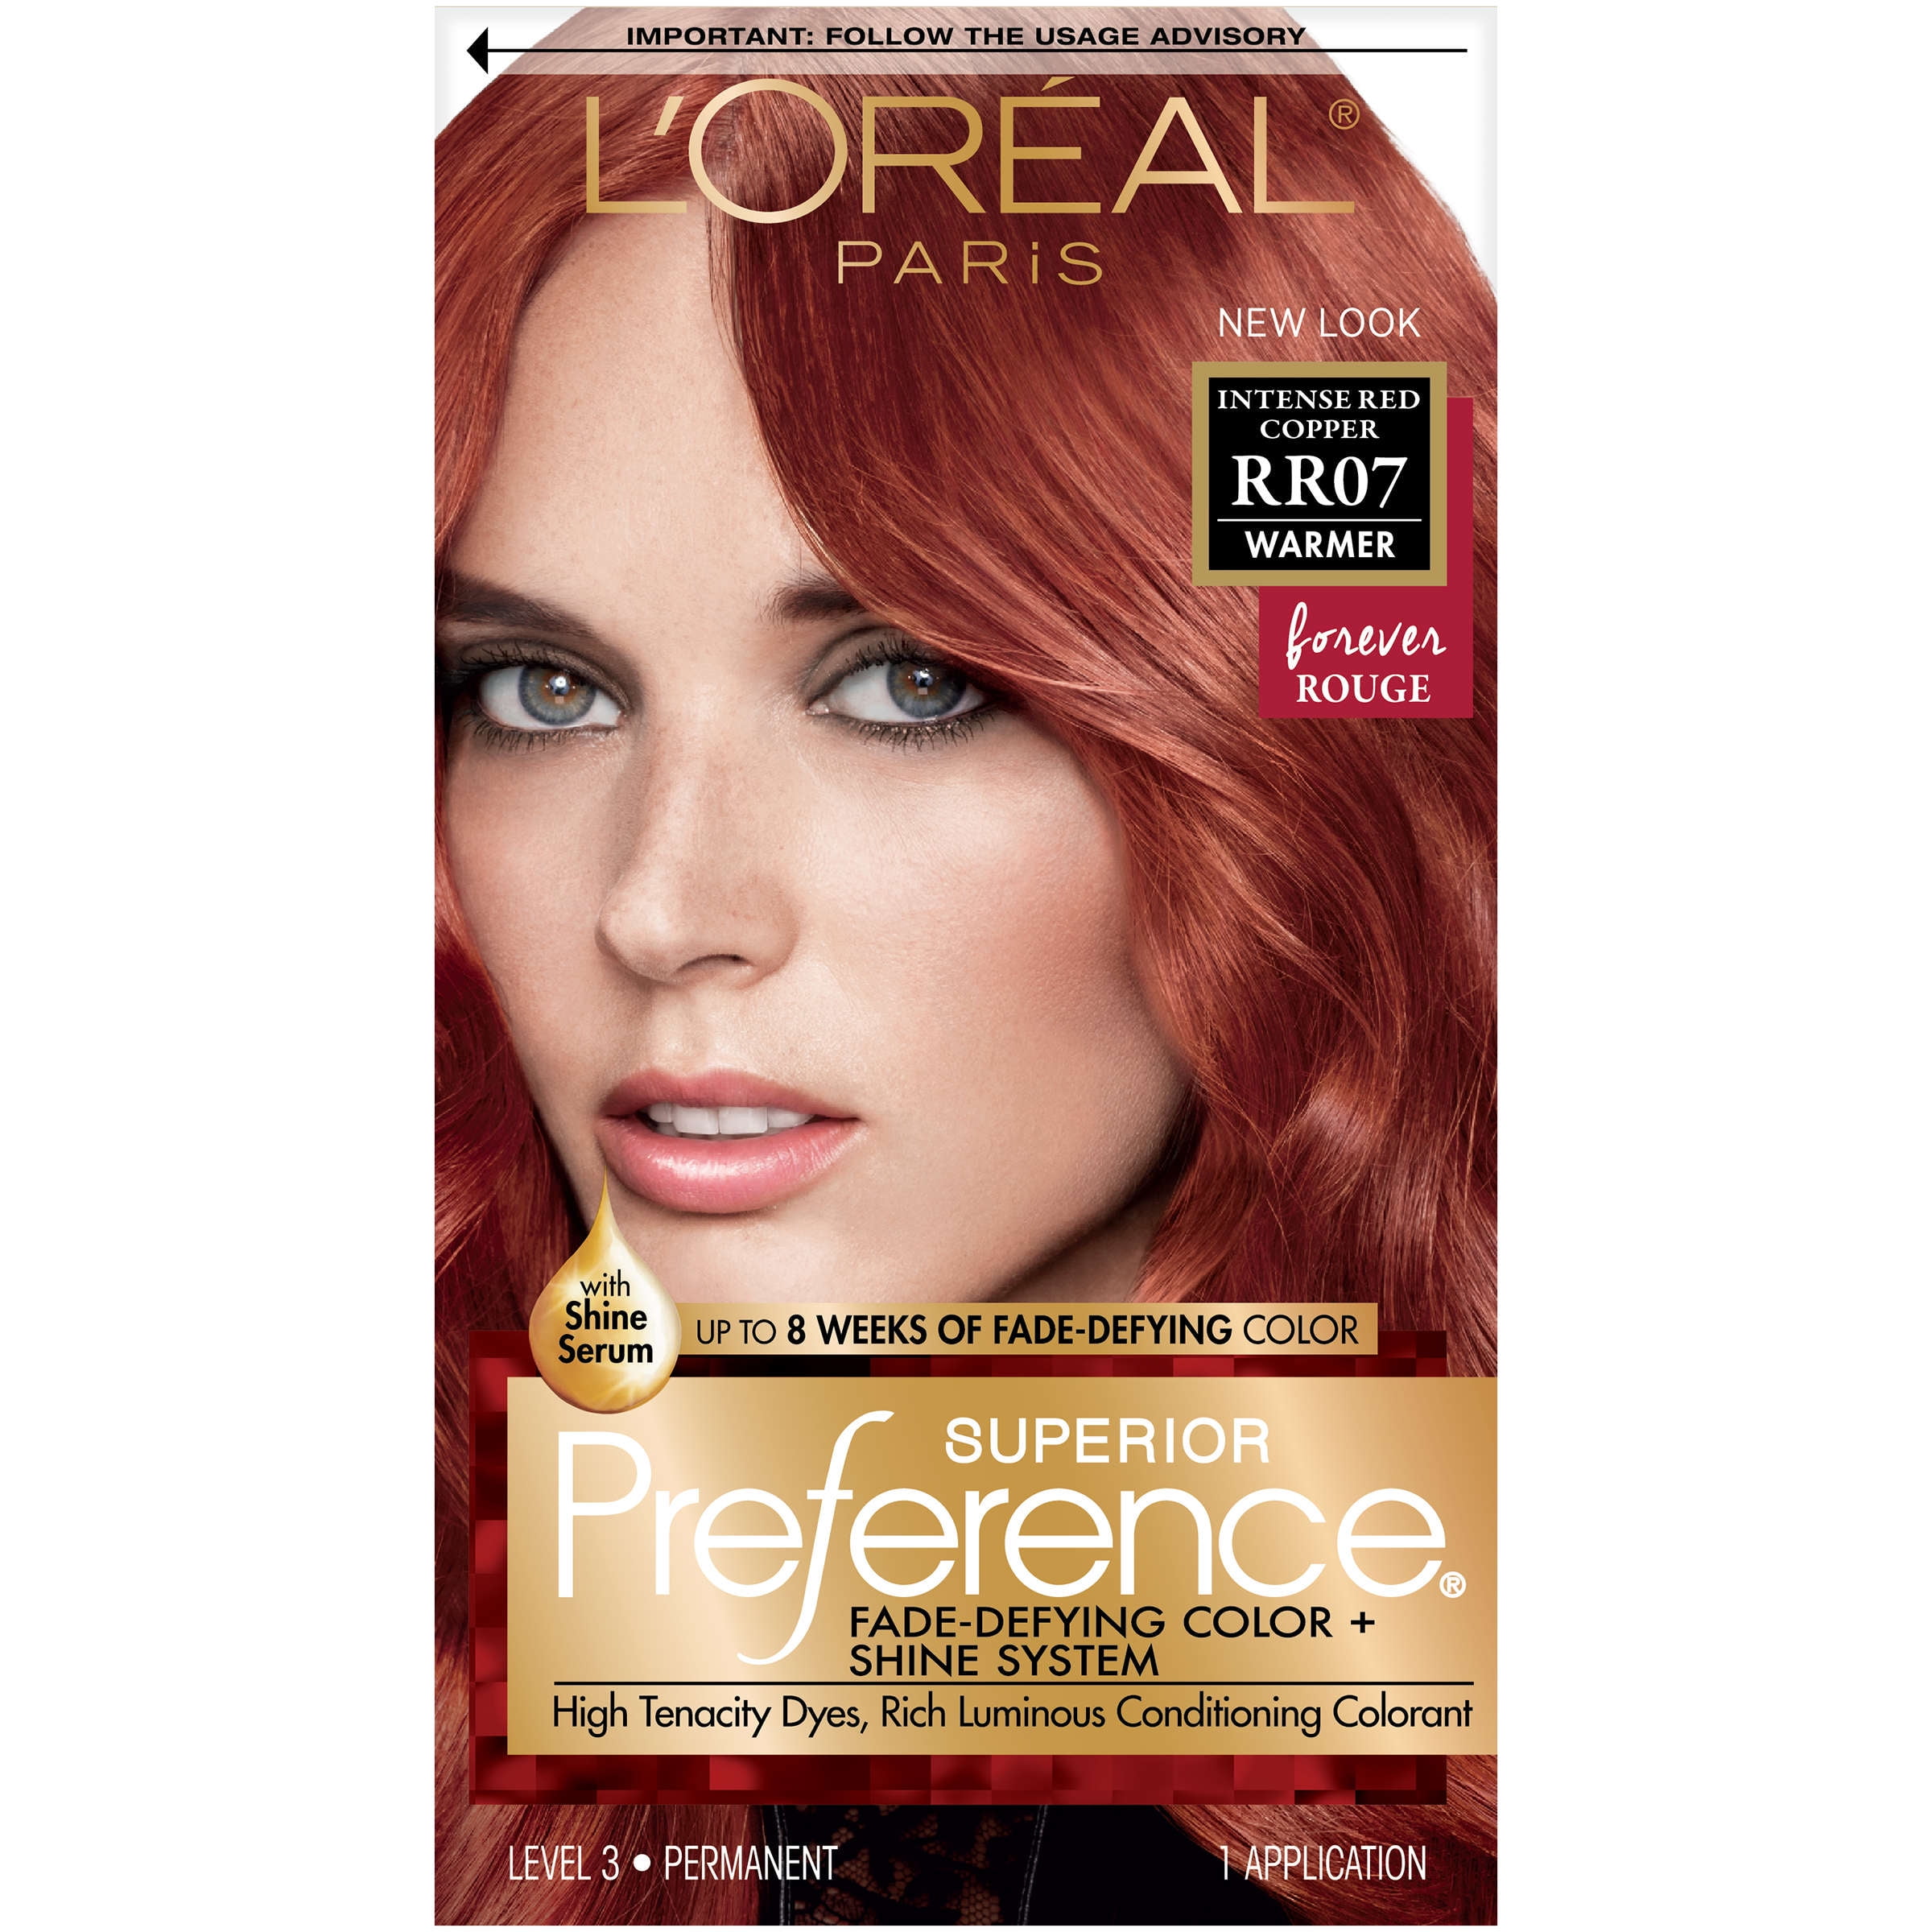 L'Oreal Paris Superior Preference Fade-Defying Shine Permanent Hair Color,  RR-07 Intense Red Copper, 1 Kit - Walmart.com